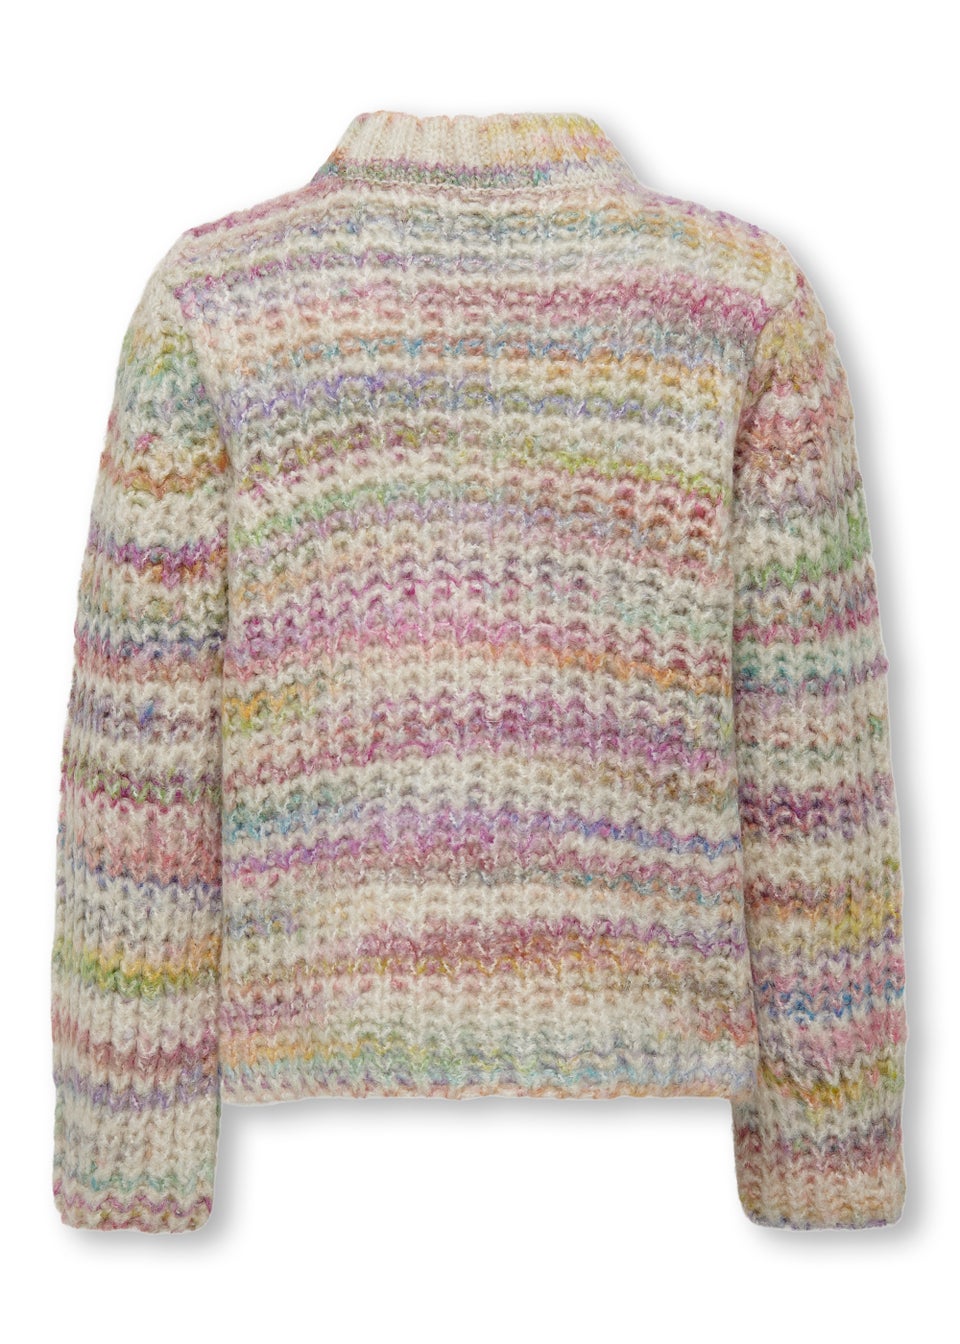 ONLY Kids Multicoloured Long Sleeve Knitted Jumper (5-14yrs)